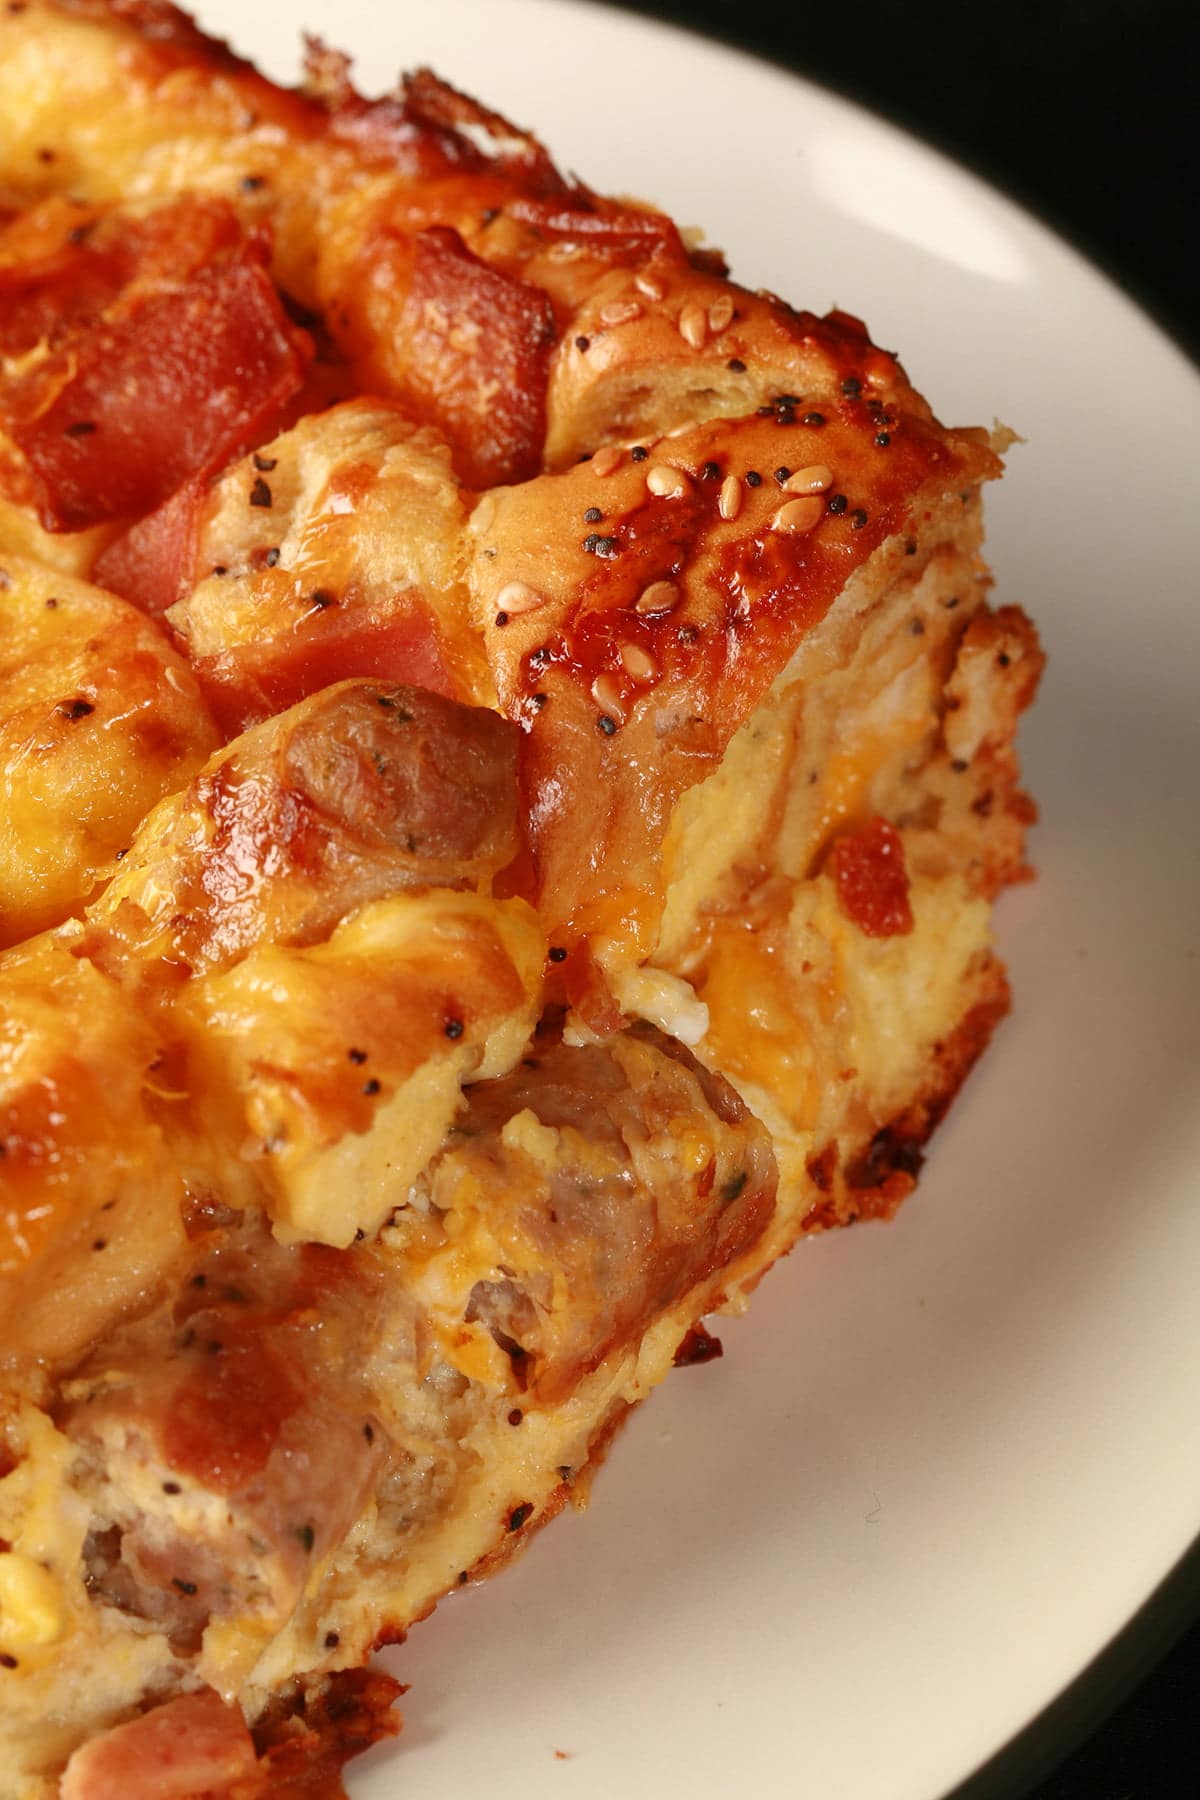 A square serving of breakfast bagel casserole. Eggs, bacon, chunks of bagel, and pieces of sausage are visible in the cheesy casserole.